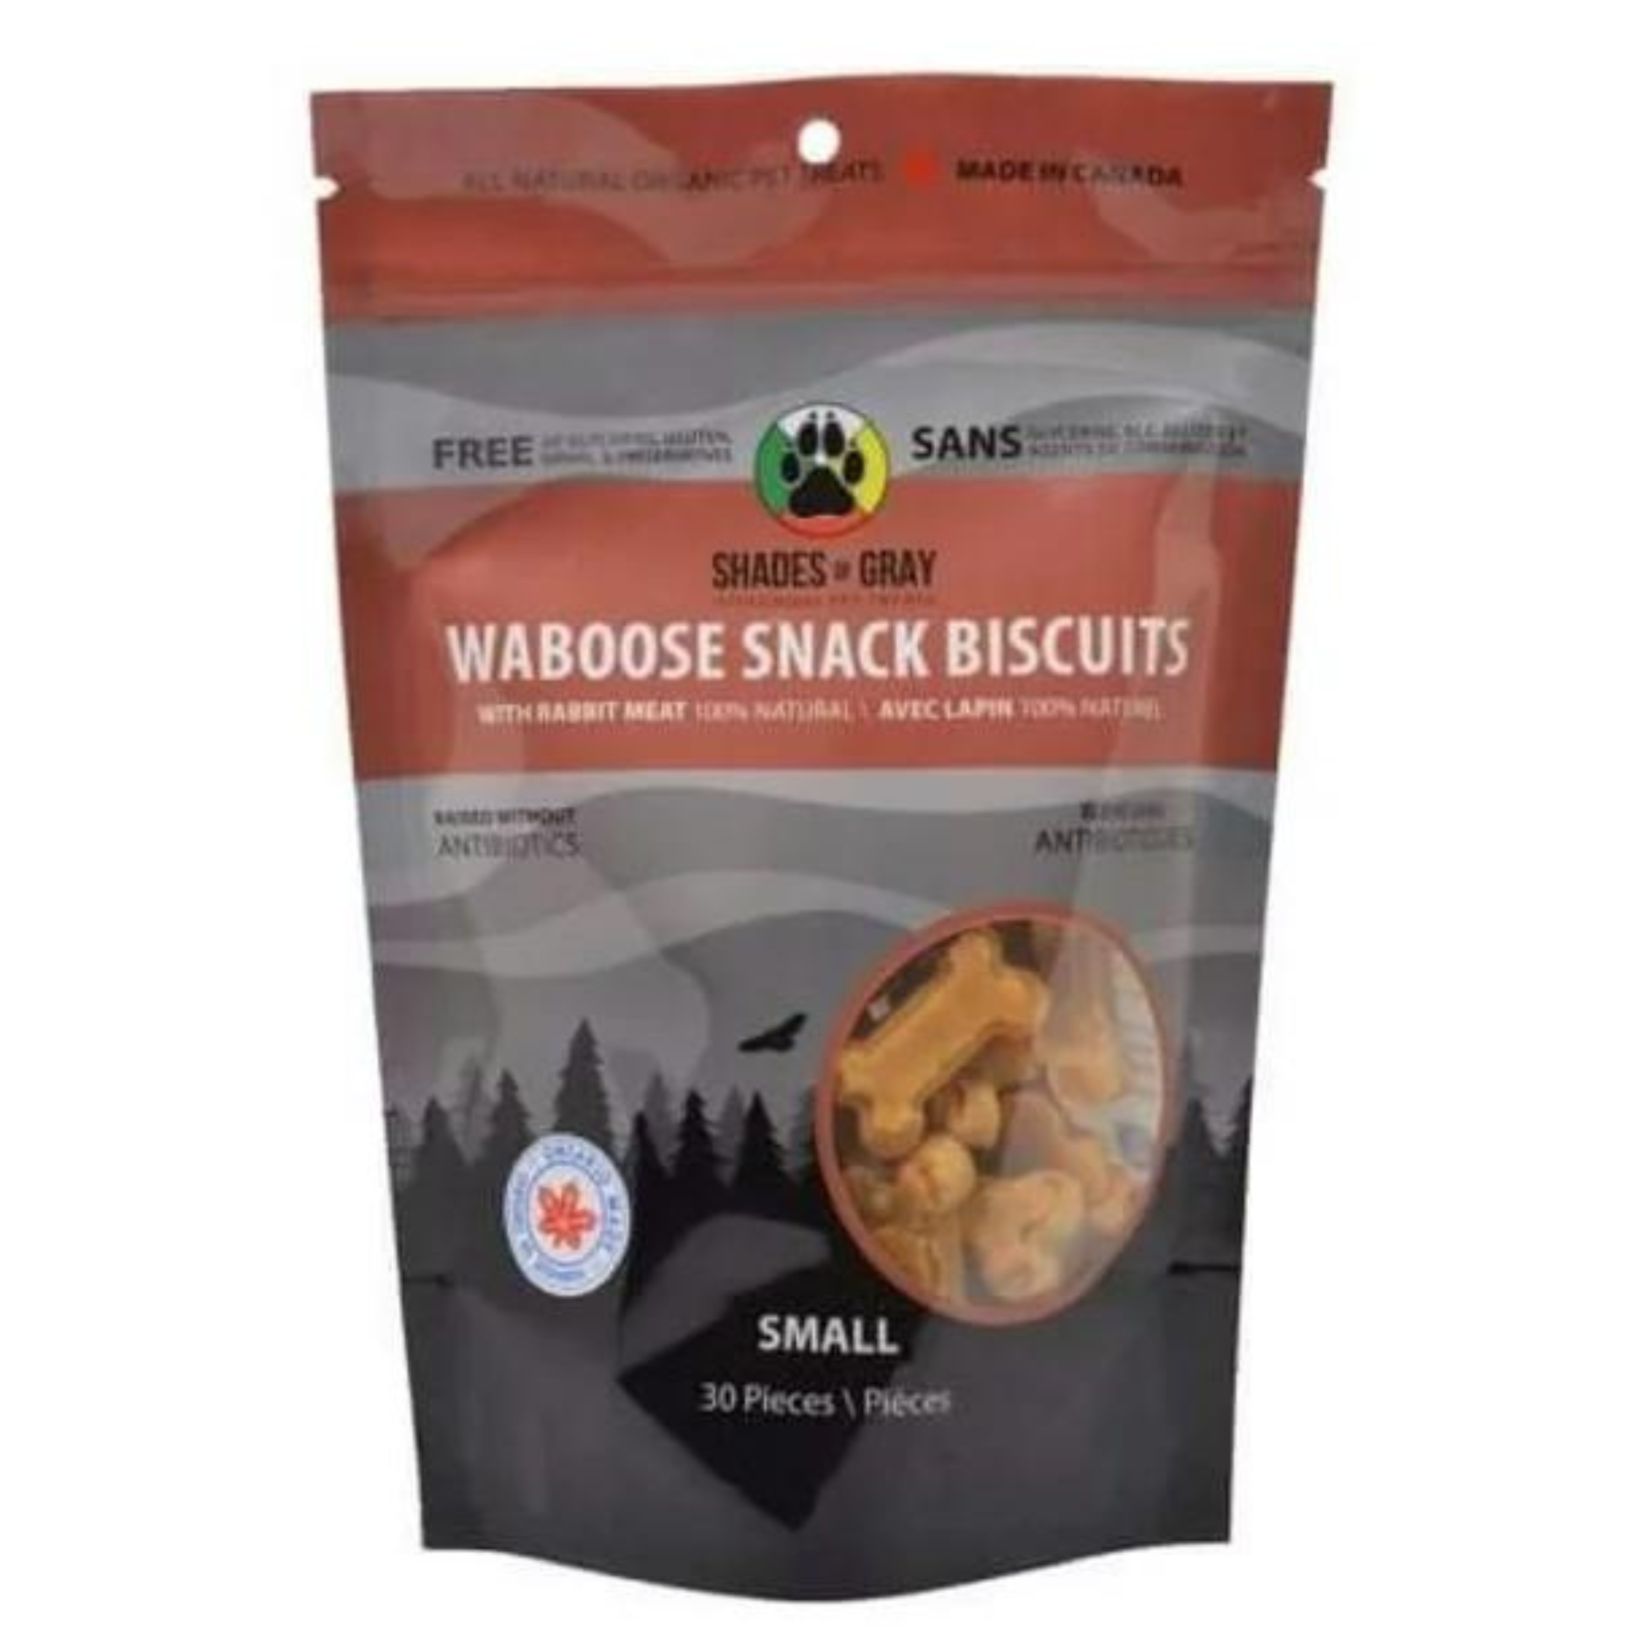 Shades of Gray Shades of Gray: Waboose Snack Biscuits with Rabbit Meat Small 30pc